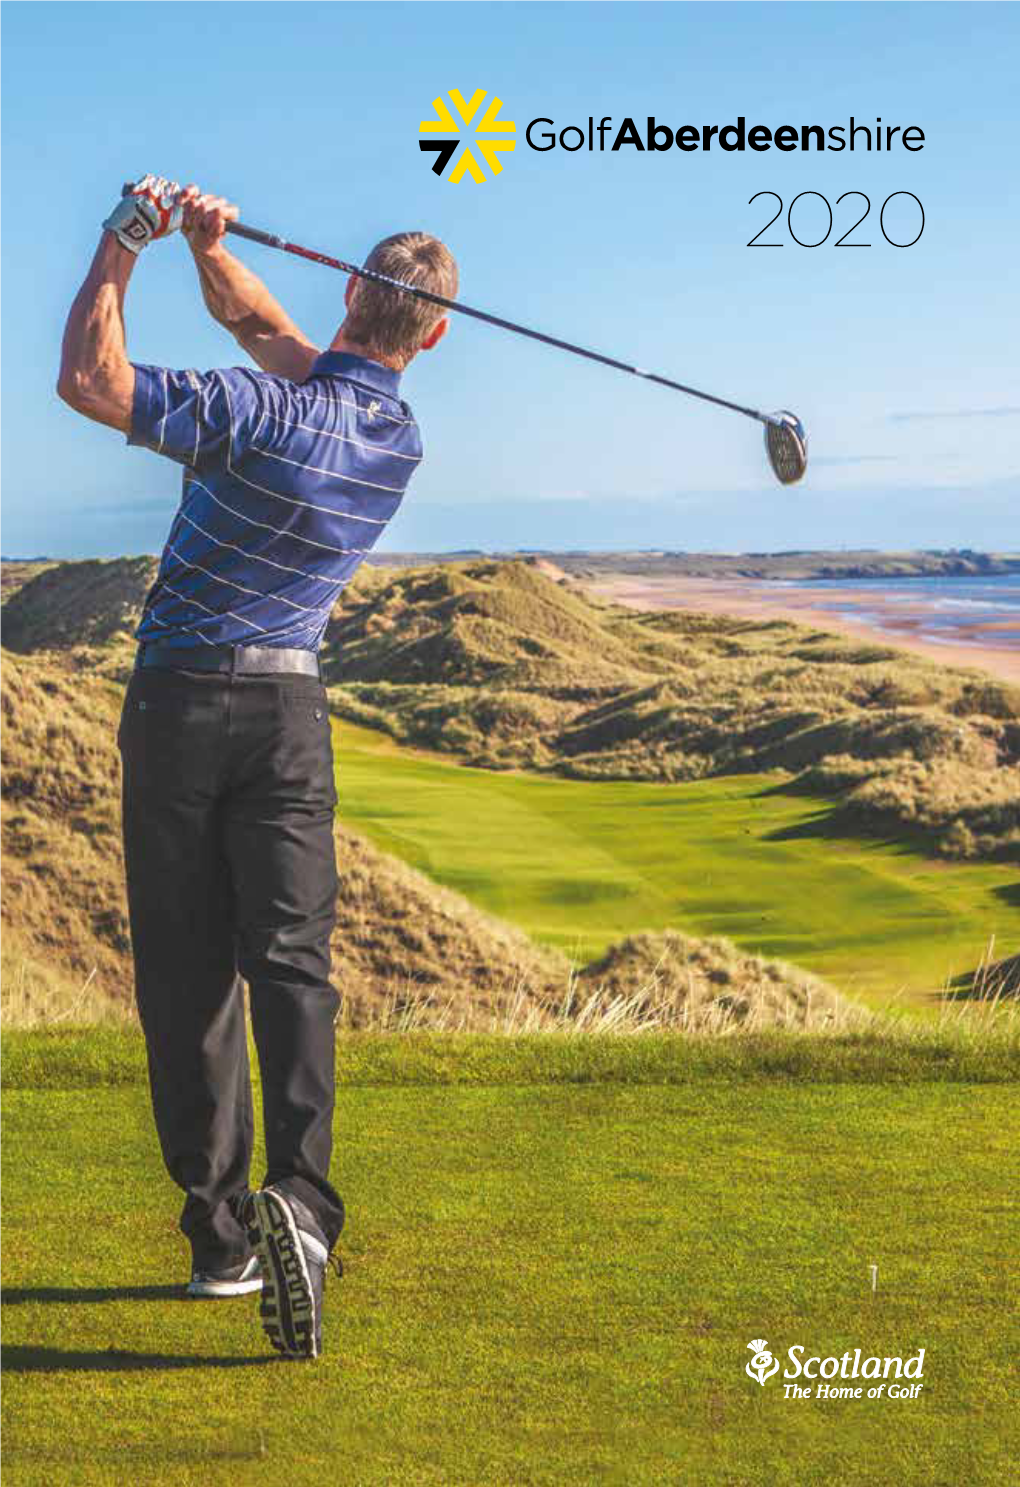 The Royal Deeside Golf Classic 26 July - 31 July 2020